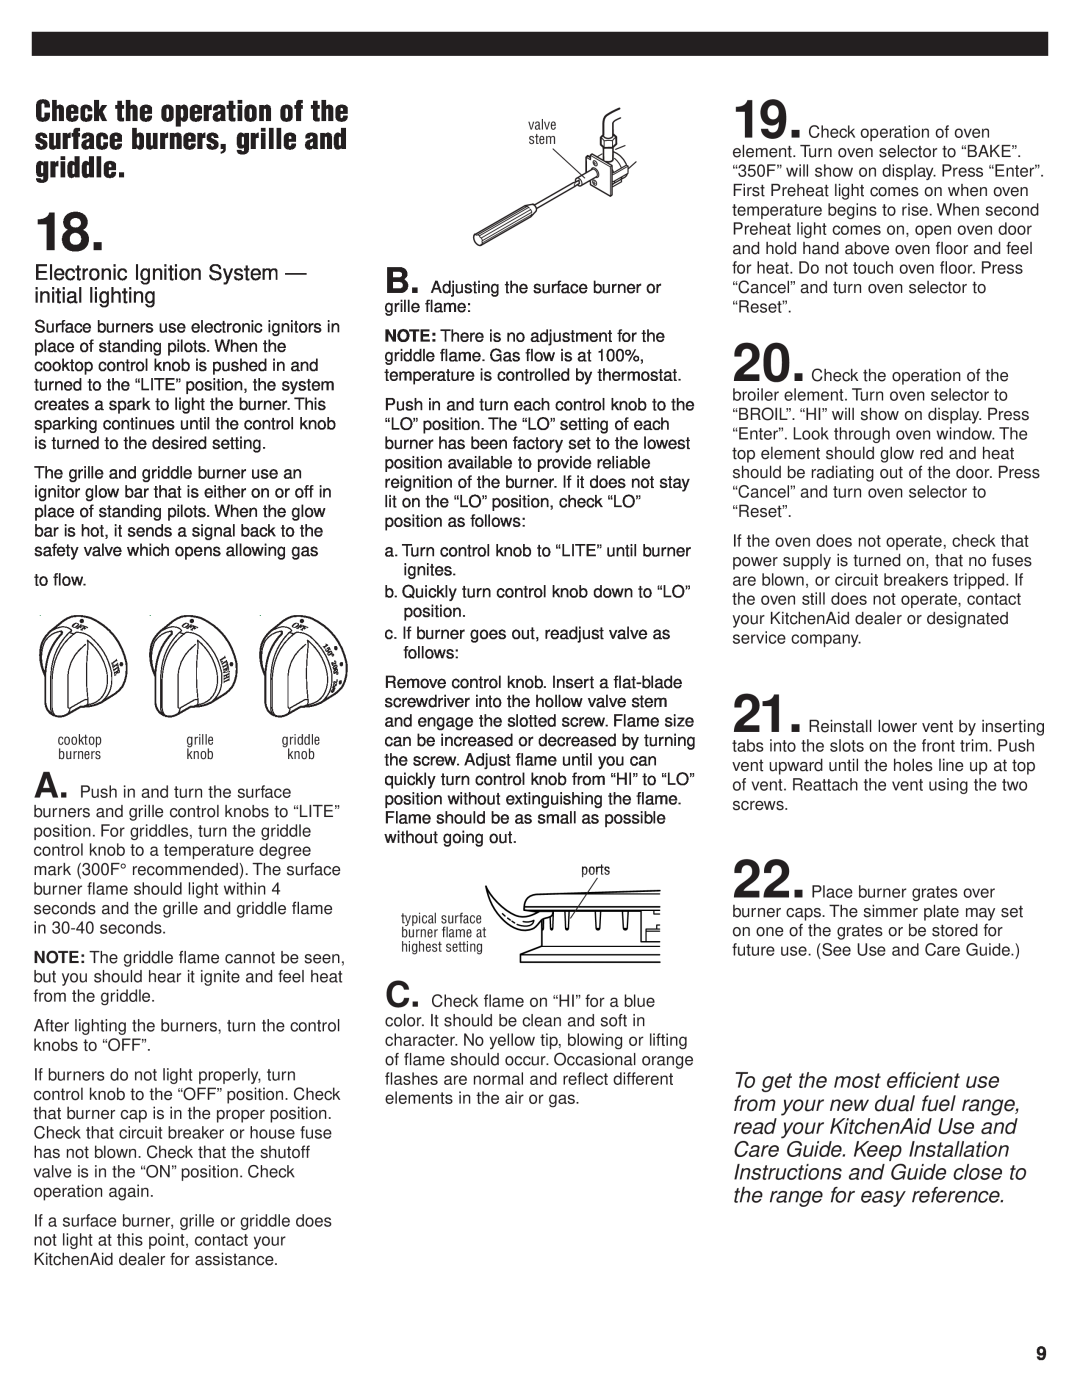 KitchenAid 8301169 installation instructions Electronic Ignition System - initial lighting 